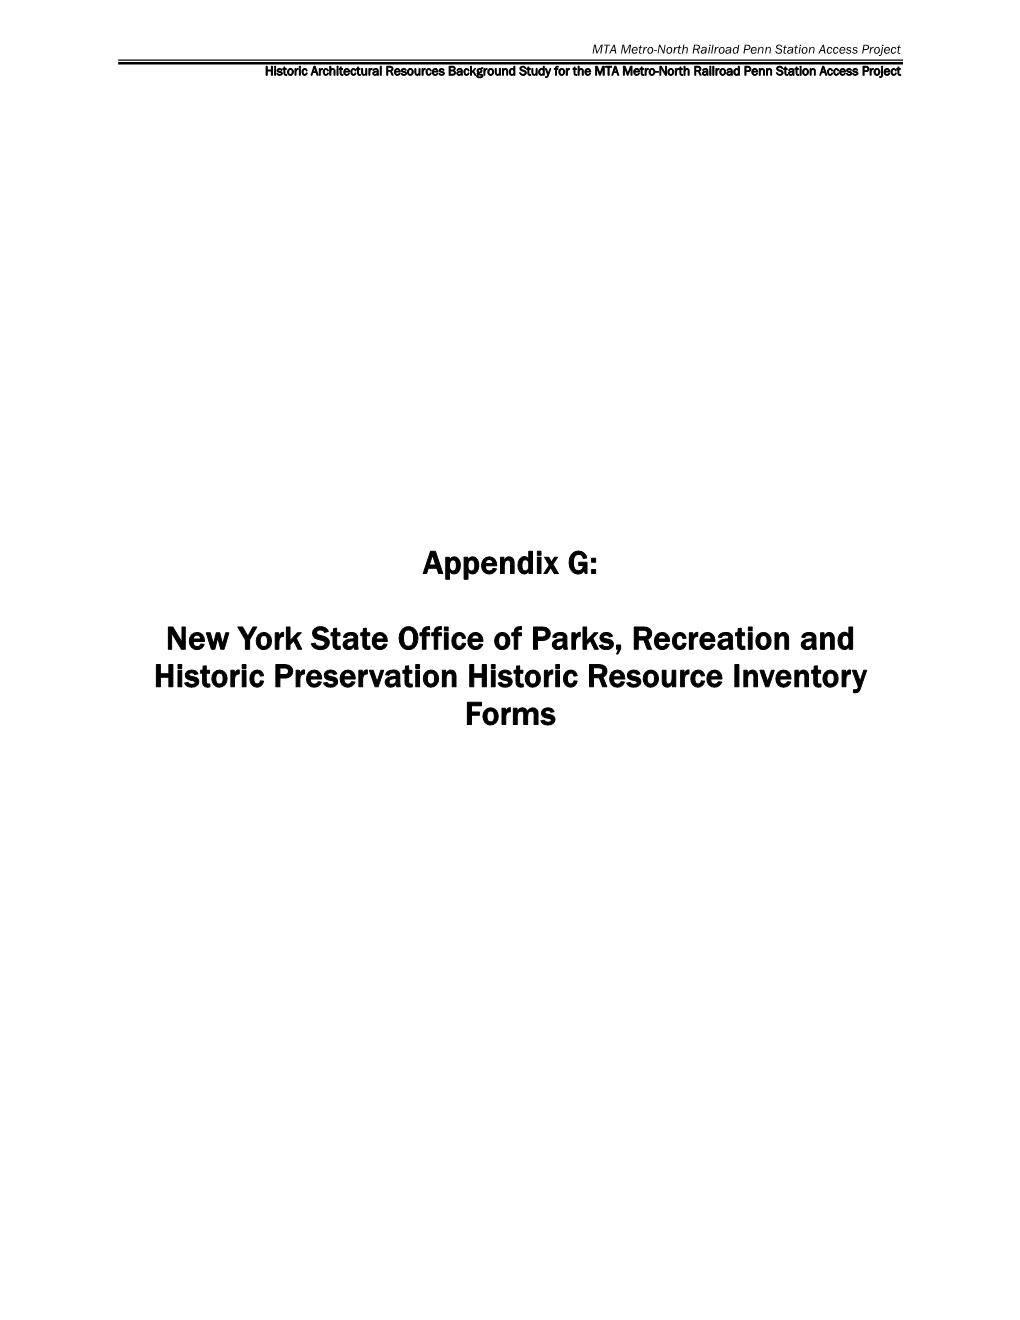 Appendix G: New York State Office of Parks, Recreation and Historic